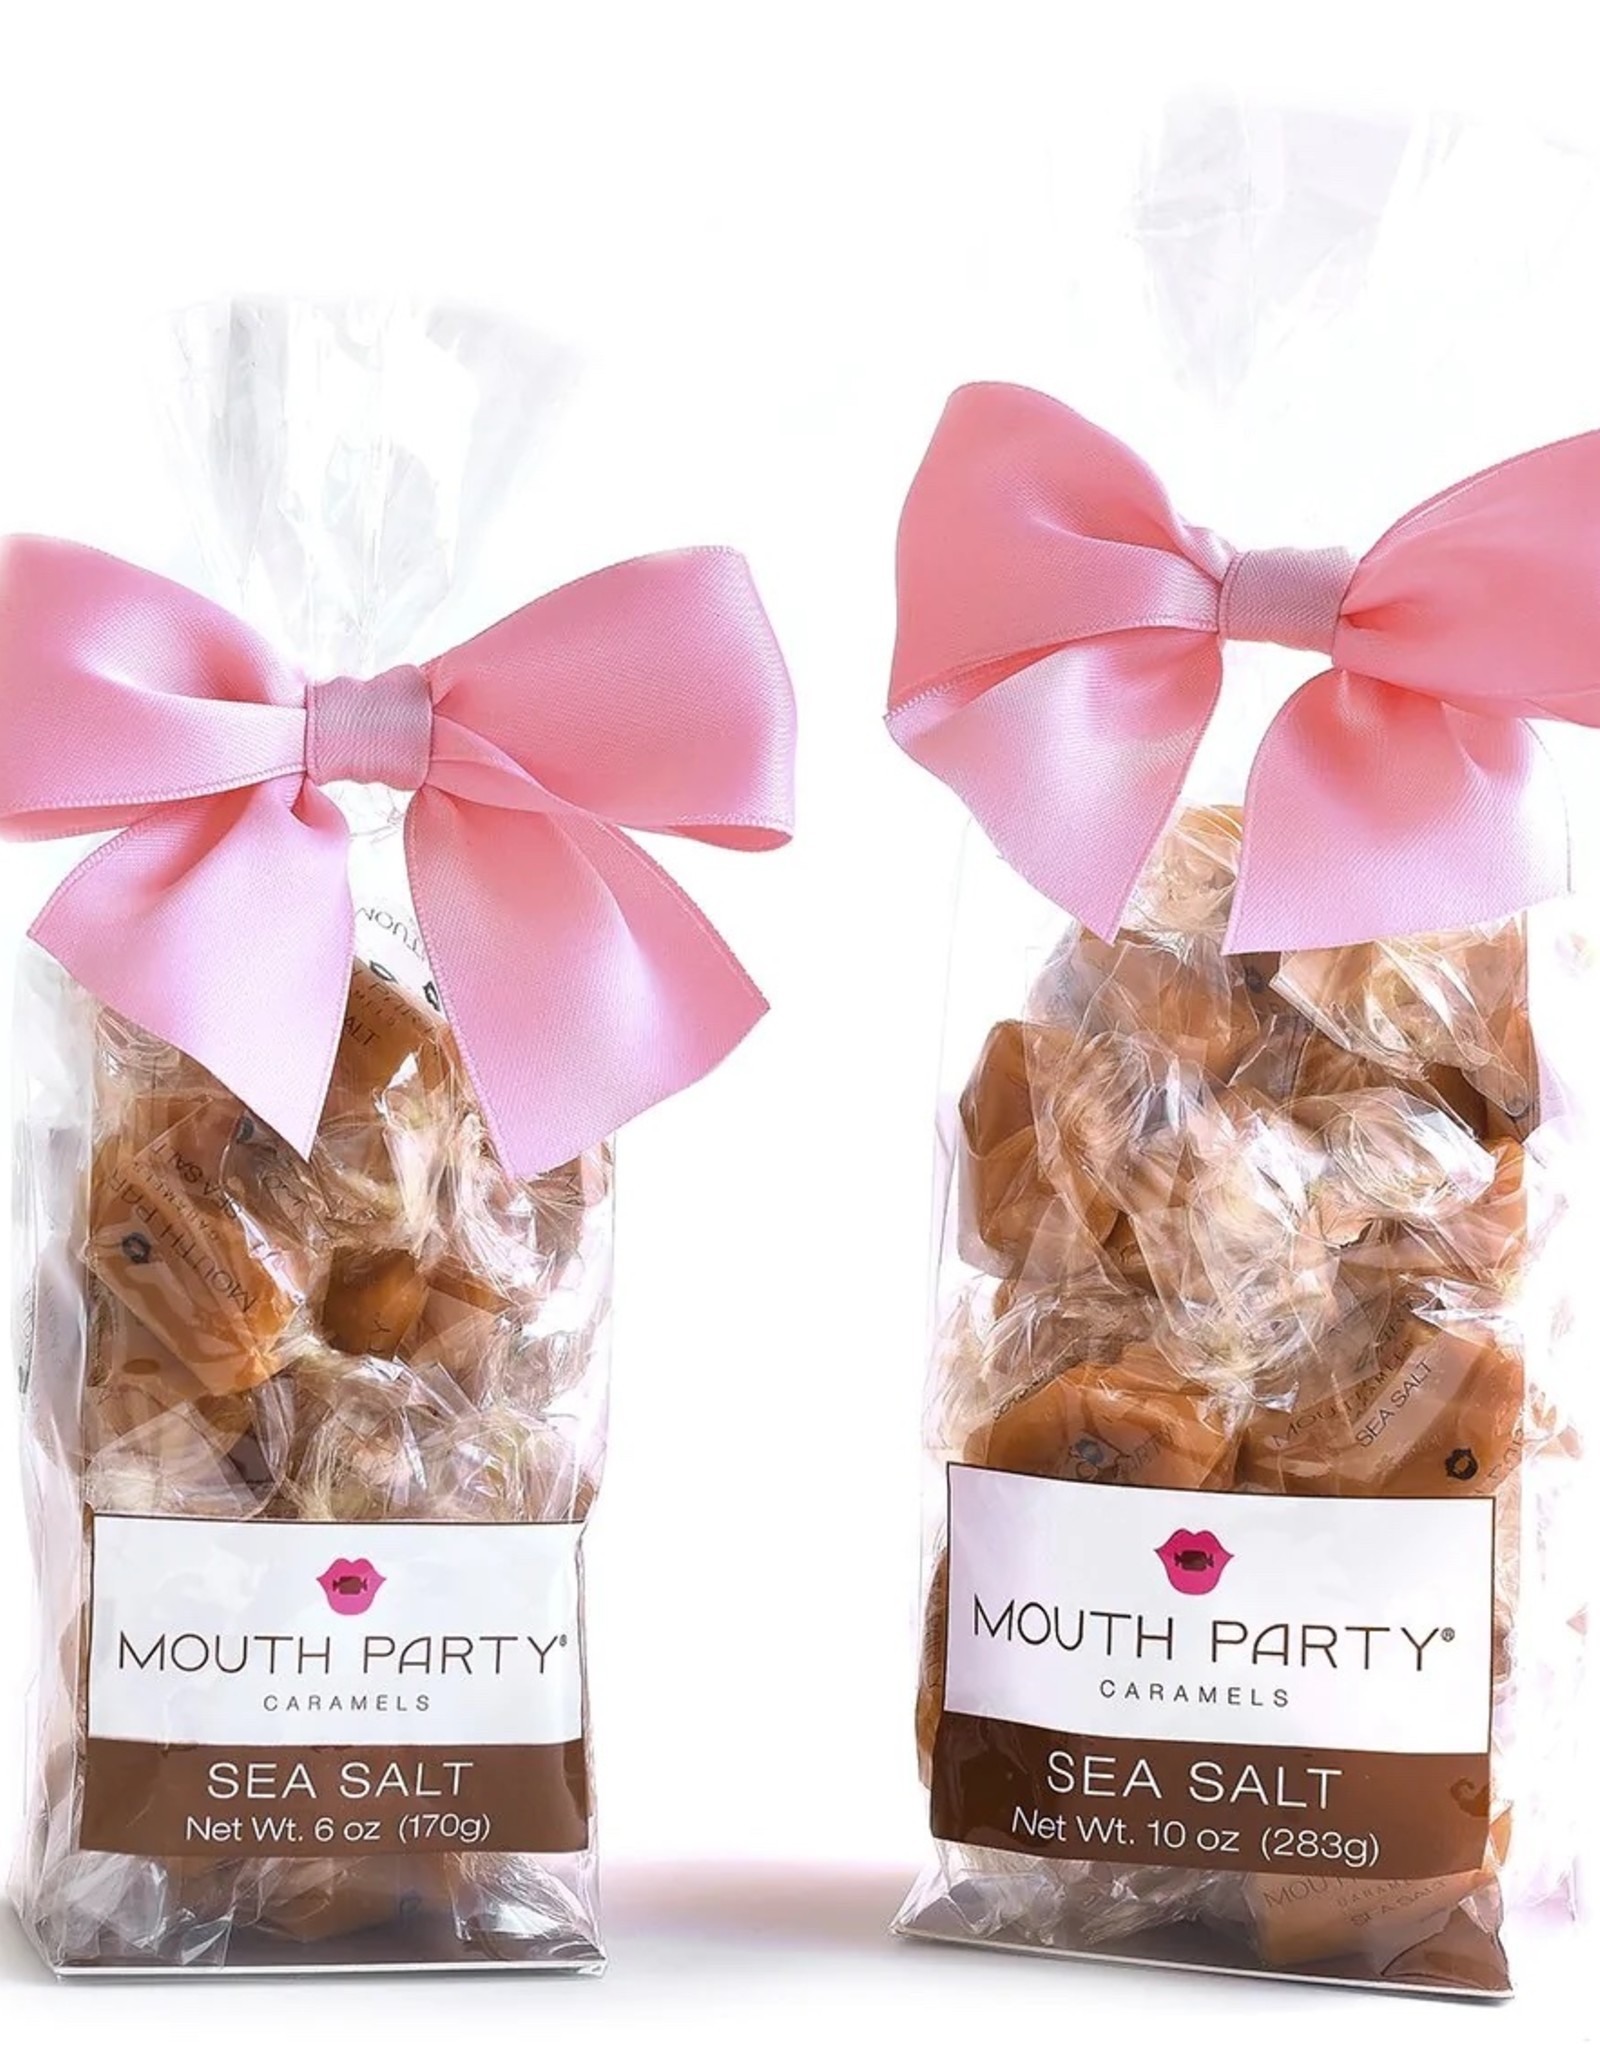 Mouth Party Mouth Party Caramel Gift Bag - Sea Salt